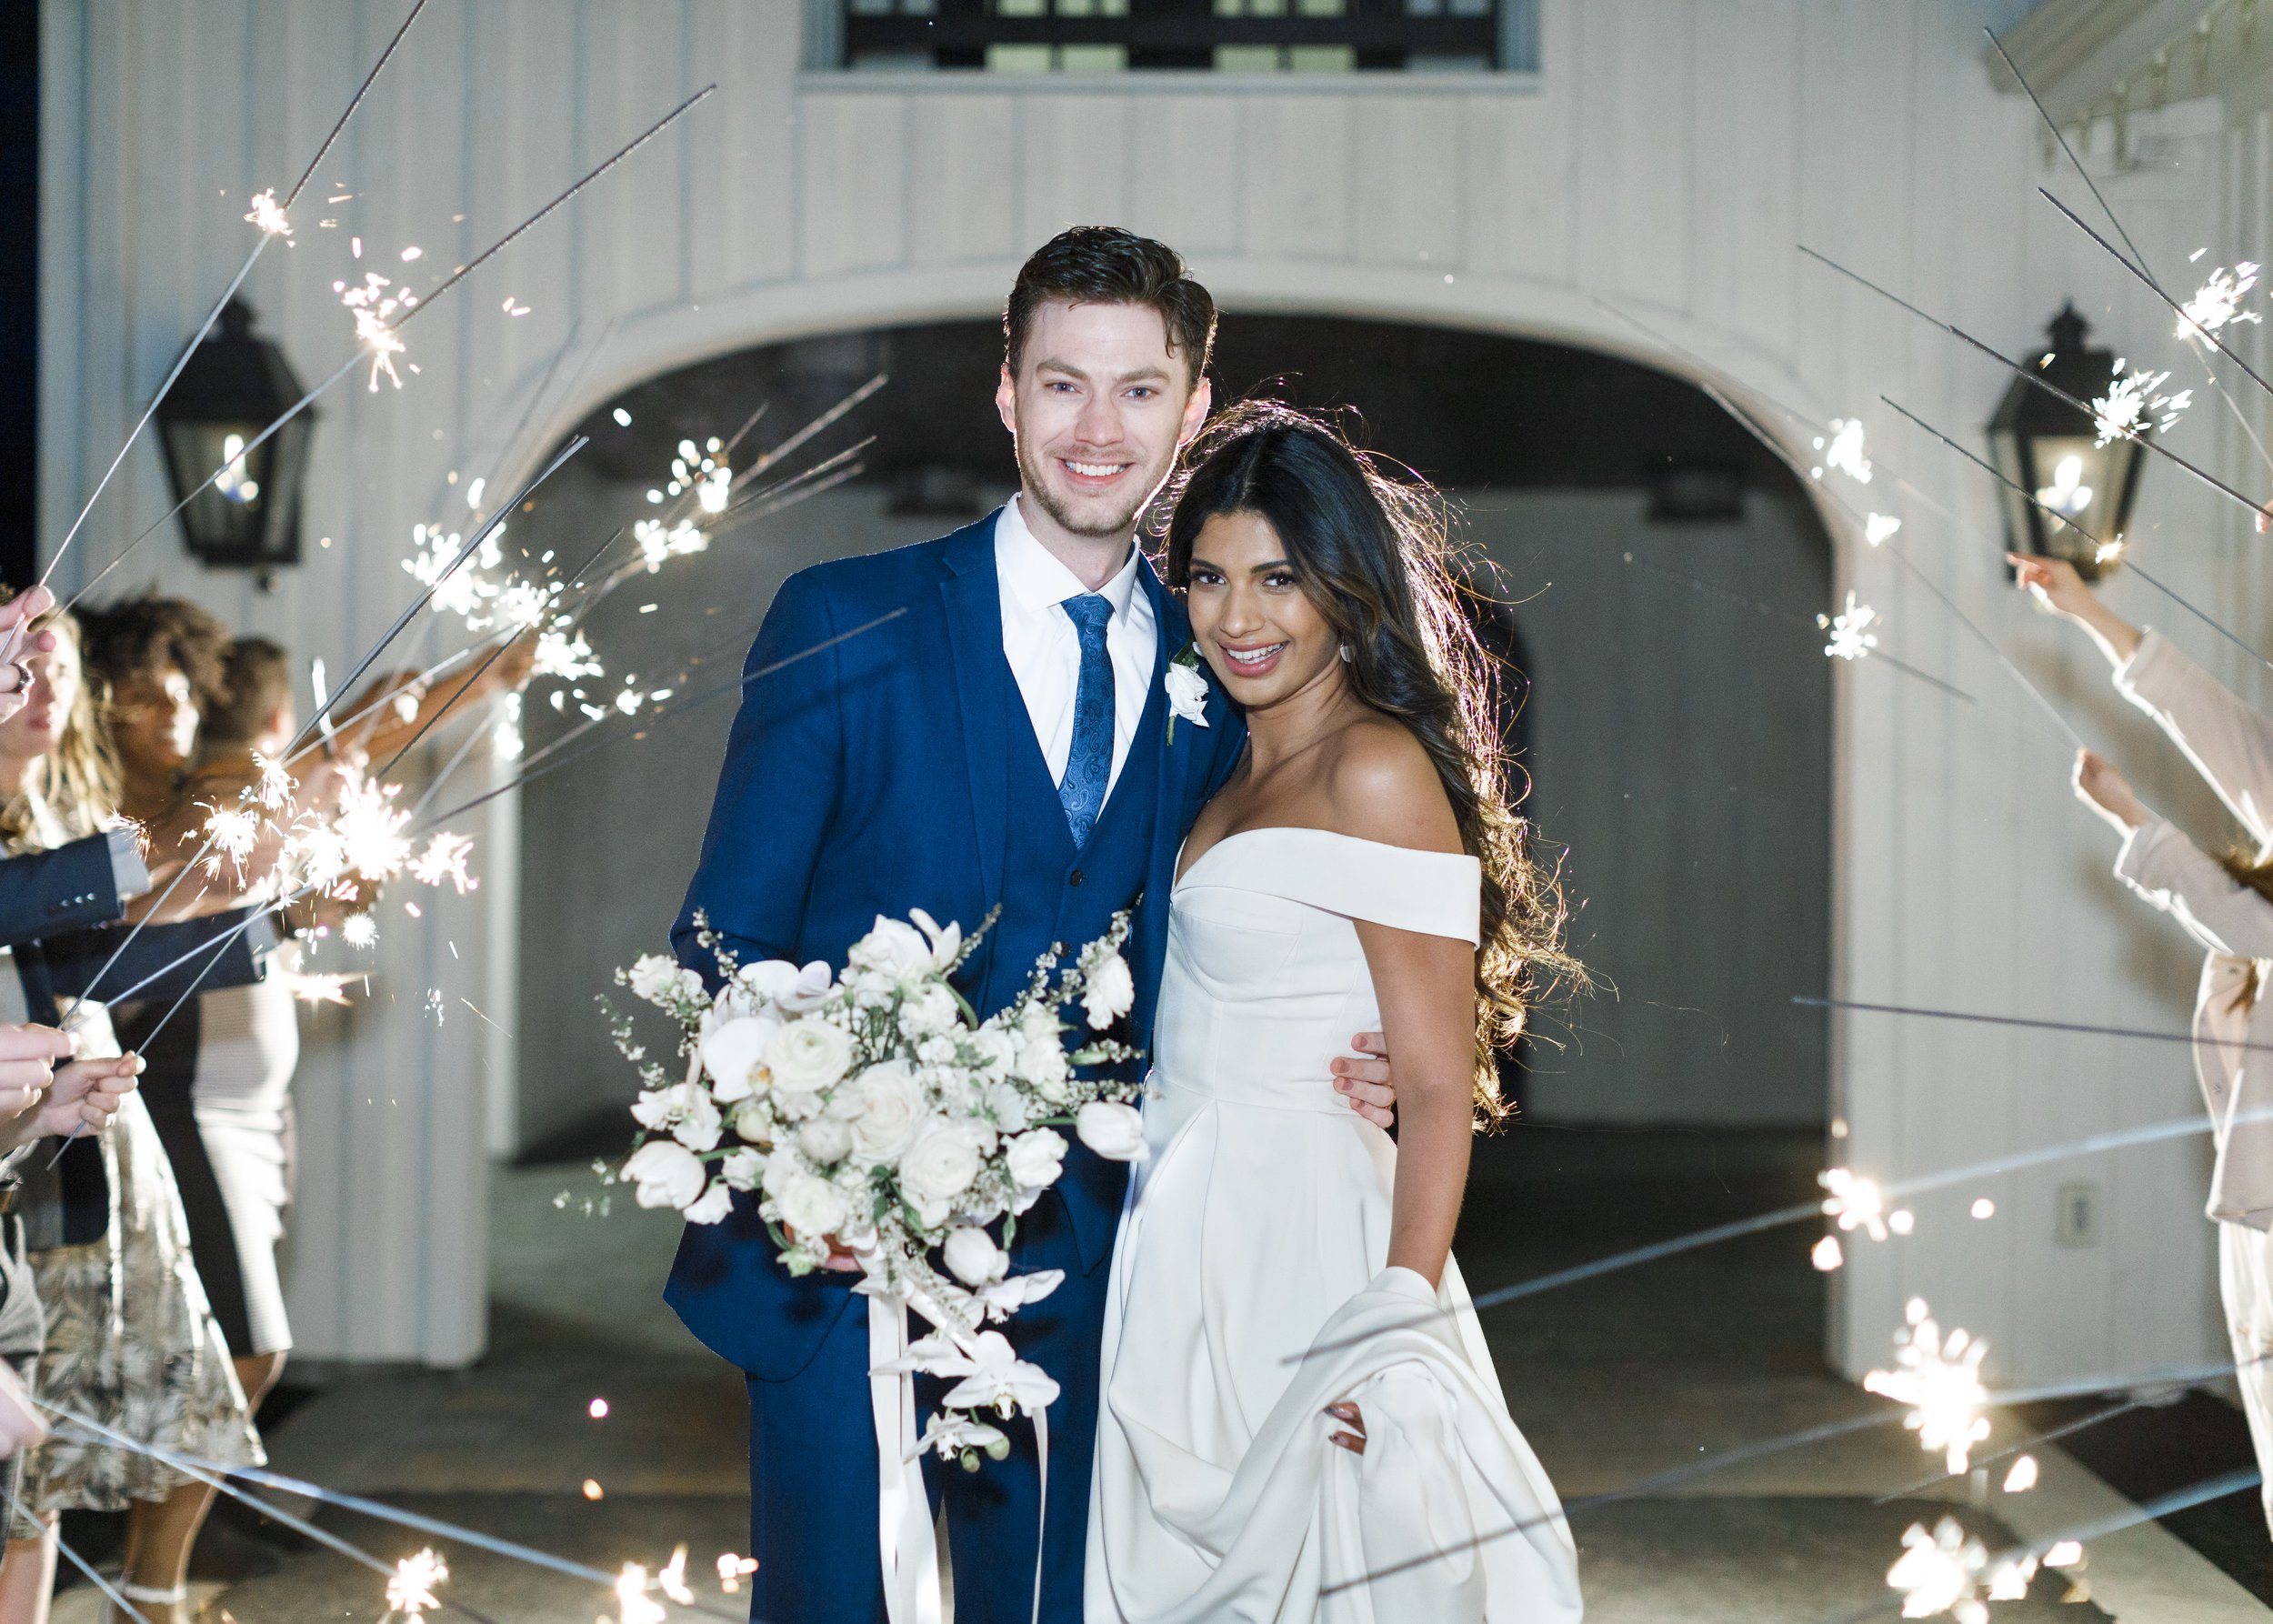  How to photograph wedding sparkler exits with wedding couples with Savanna Richardson Photography. Husband and wife sparkler exit reception send-off #SavannaRichardsonPhotography #SavannaRichardsonTips #WeddingExits #PhotographyTips #sparklers #even